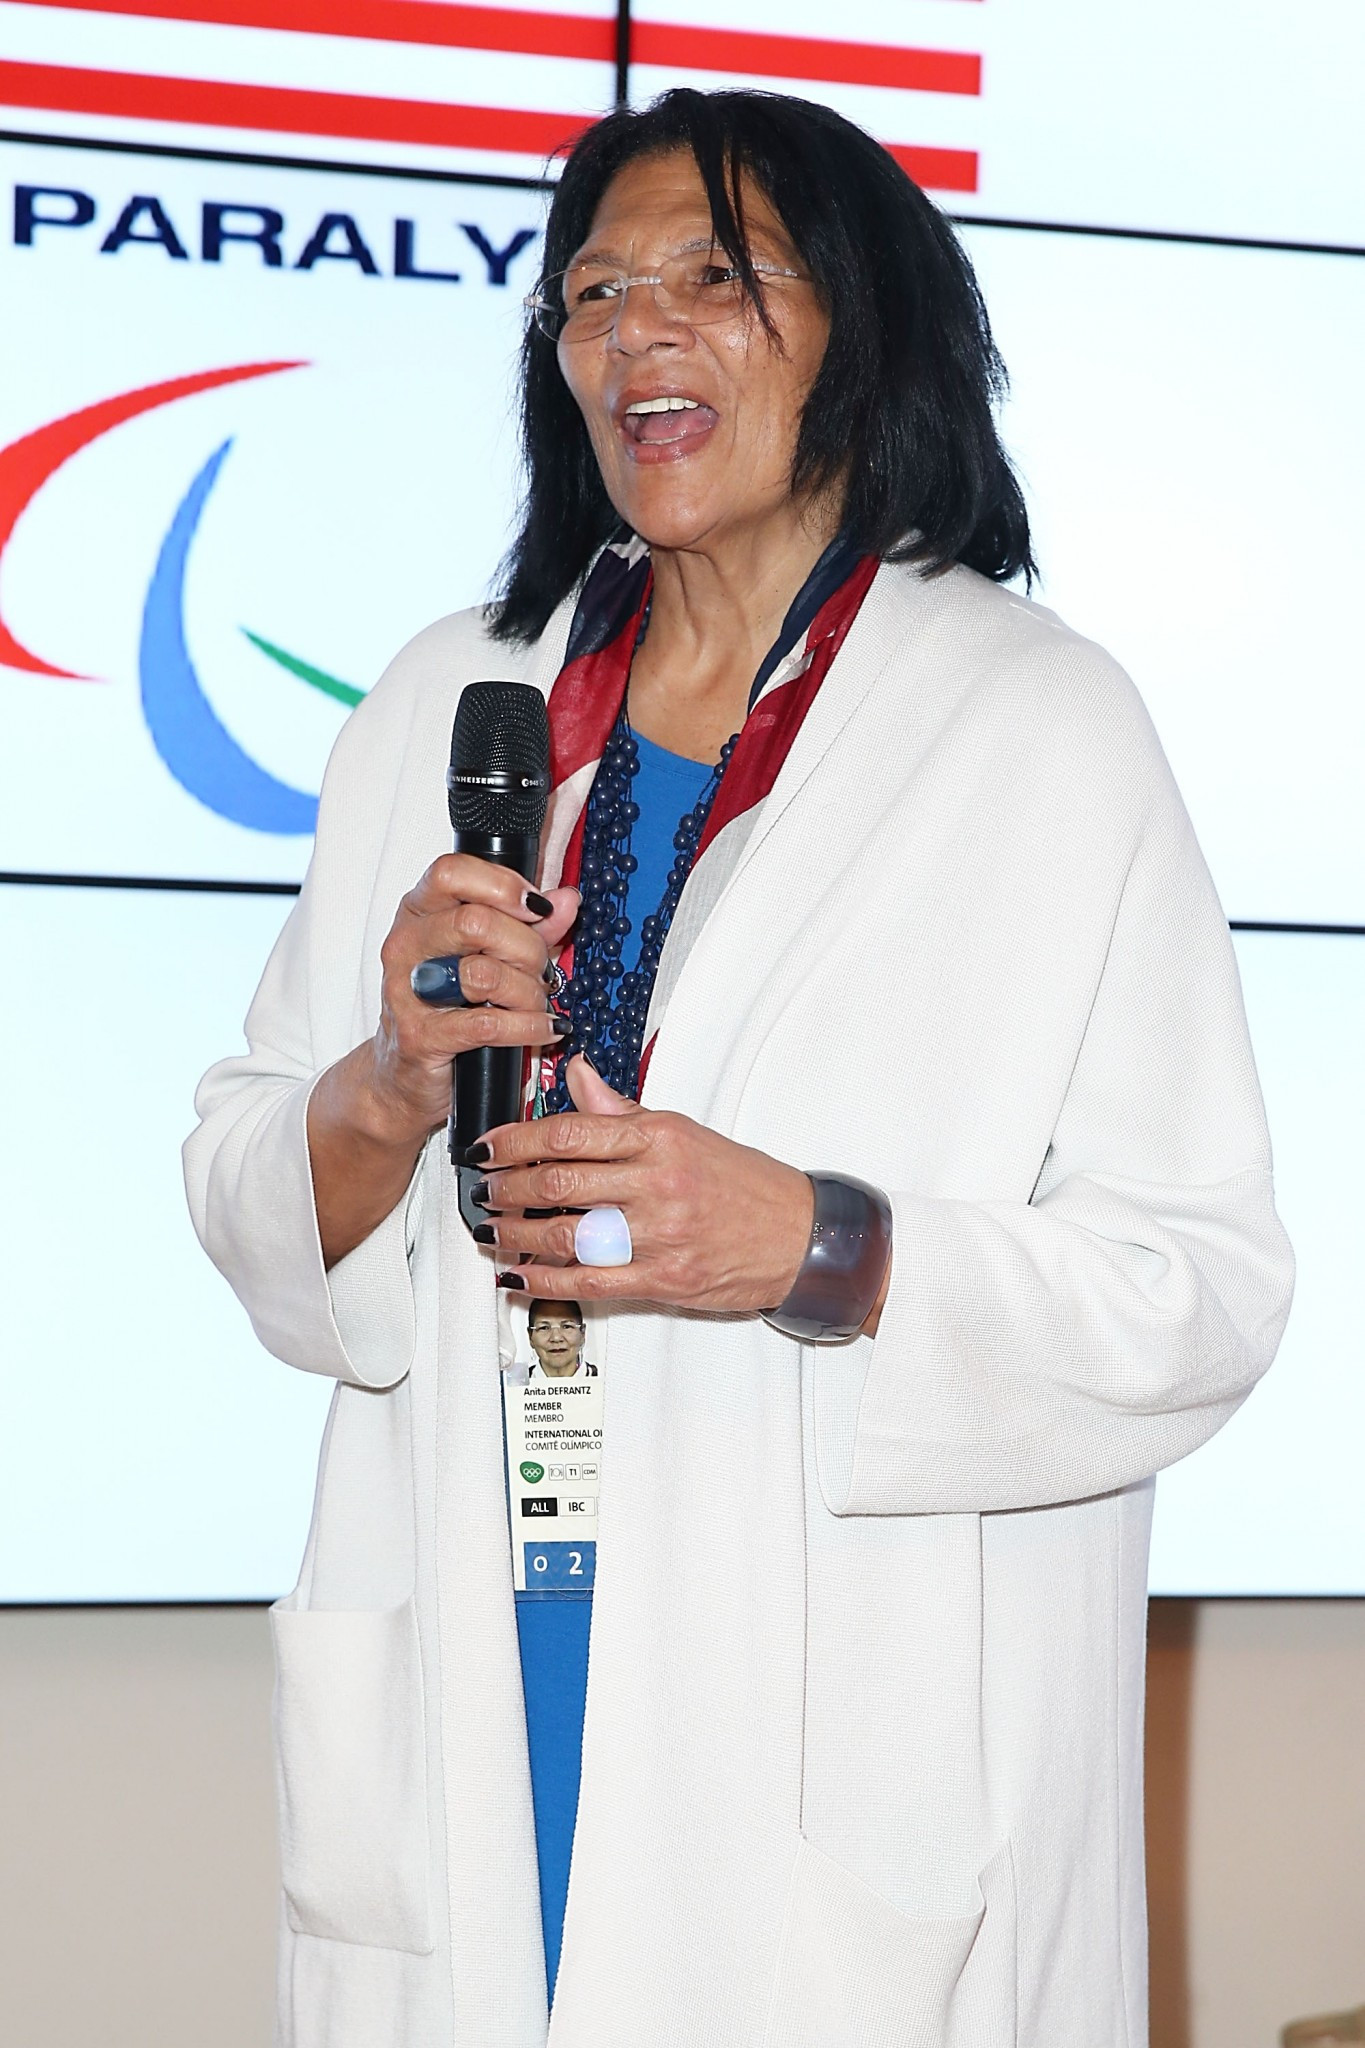 Anita DeFrantz made history as the first female IOC vice president ©Getty Images